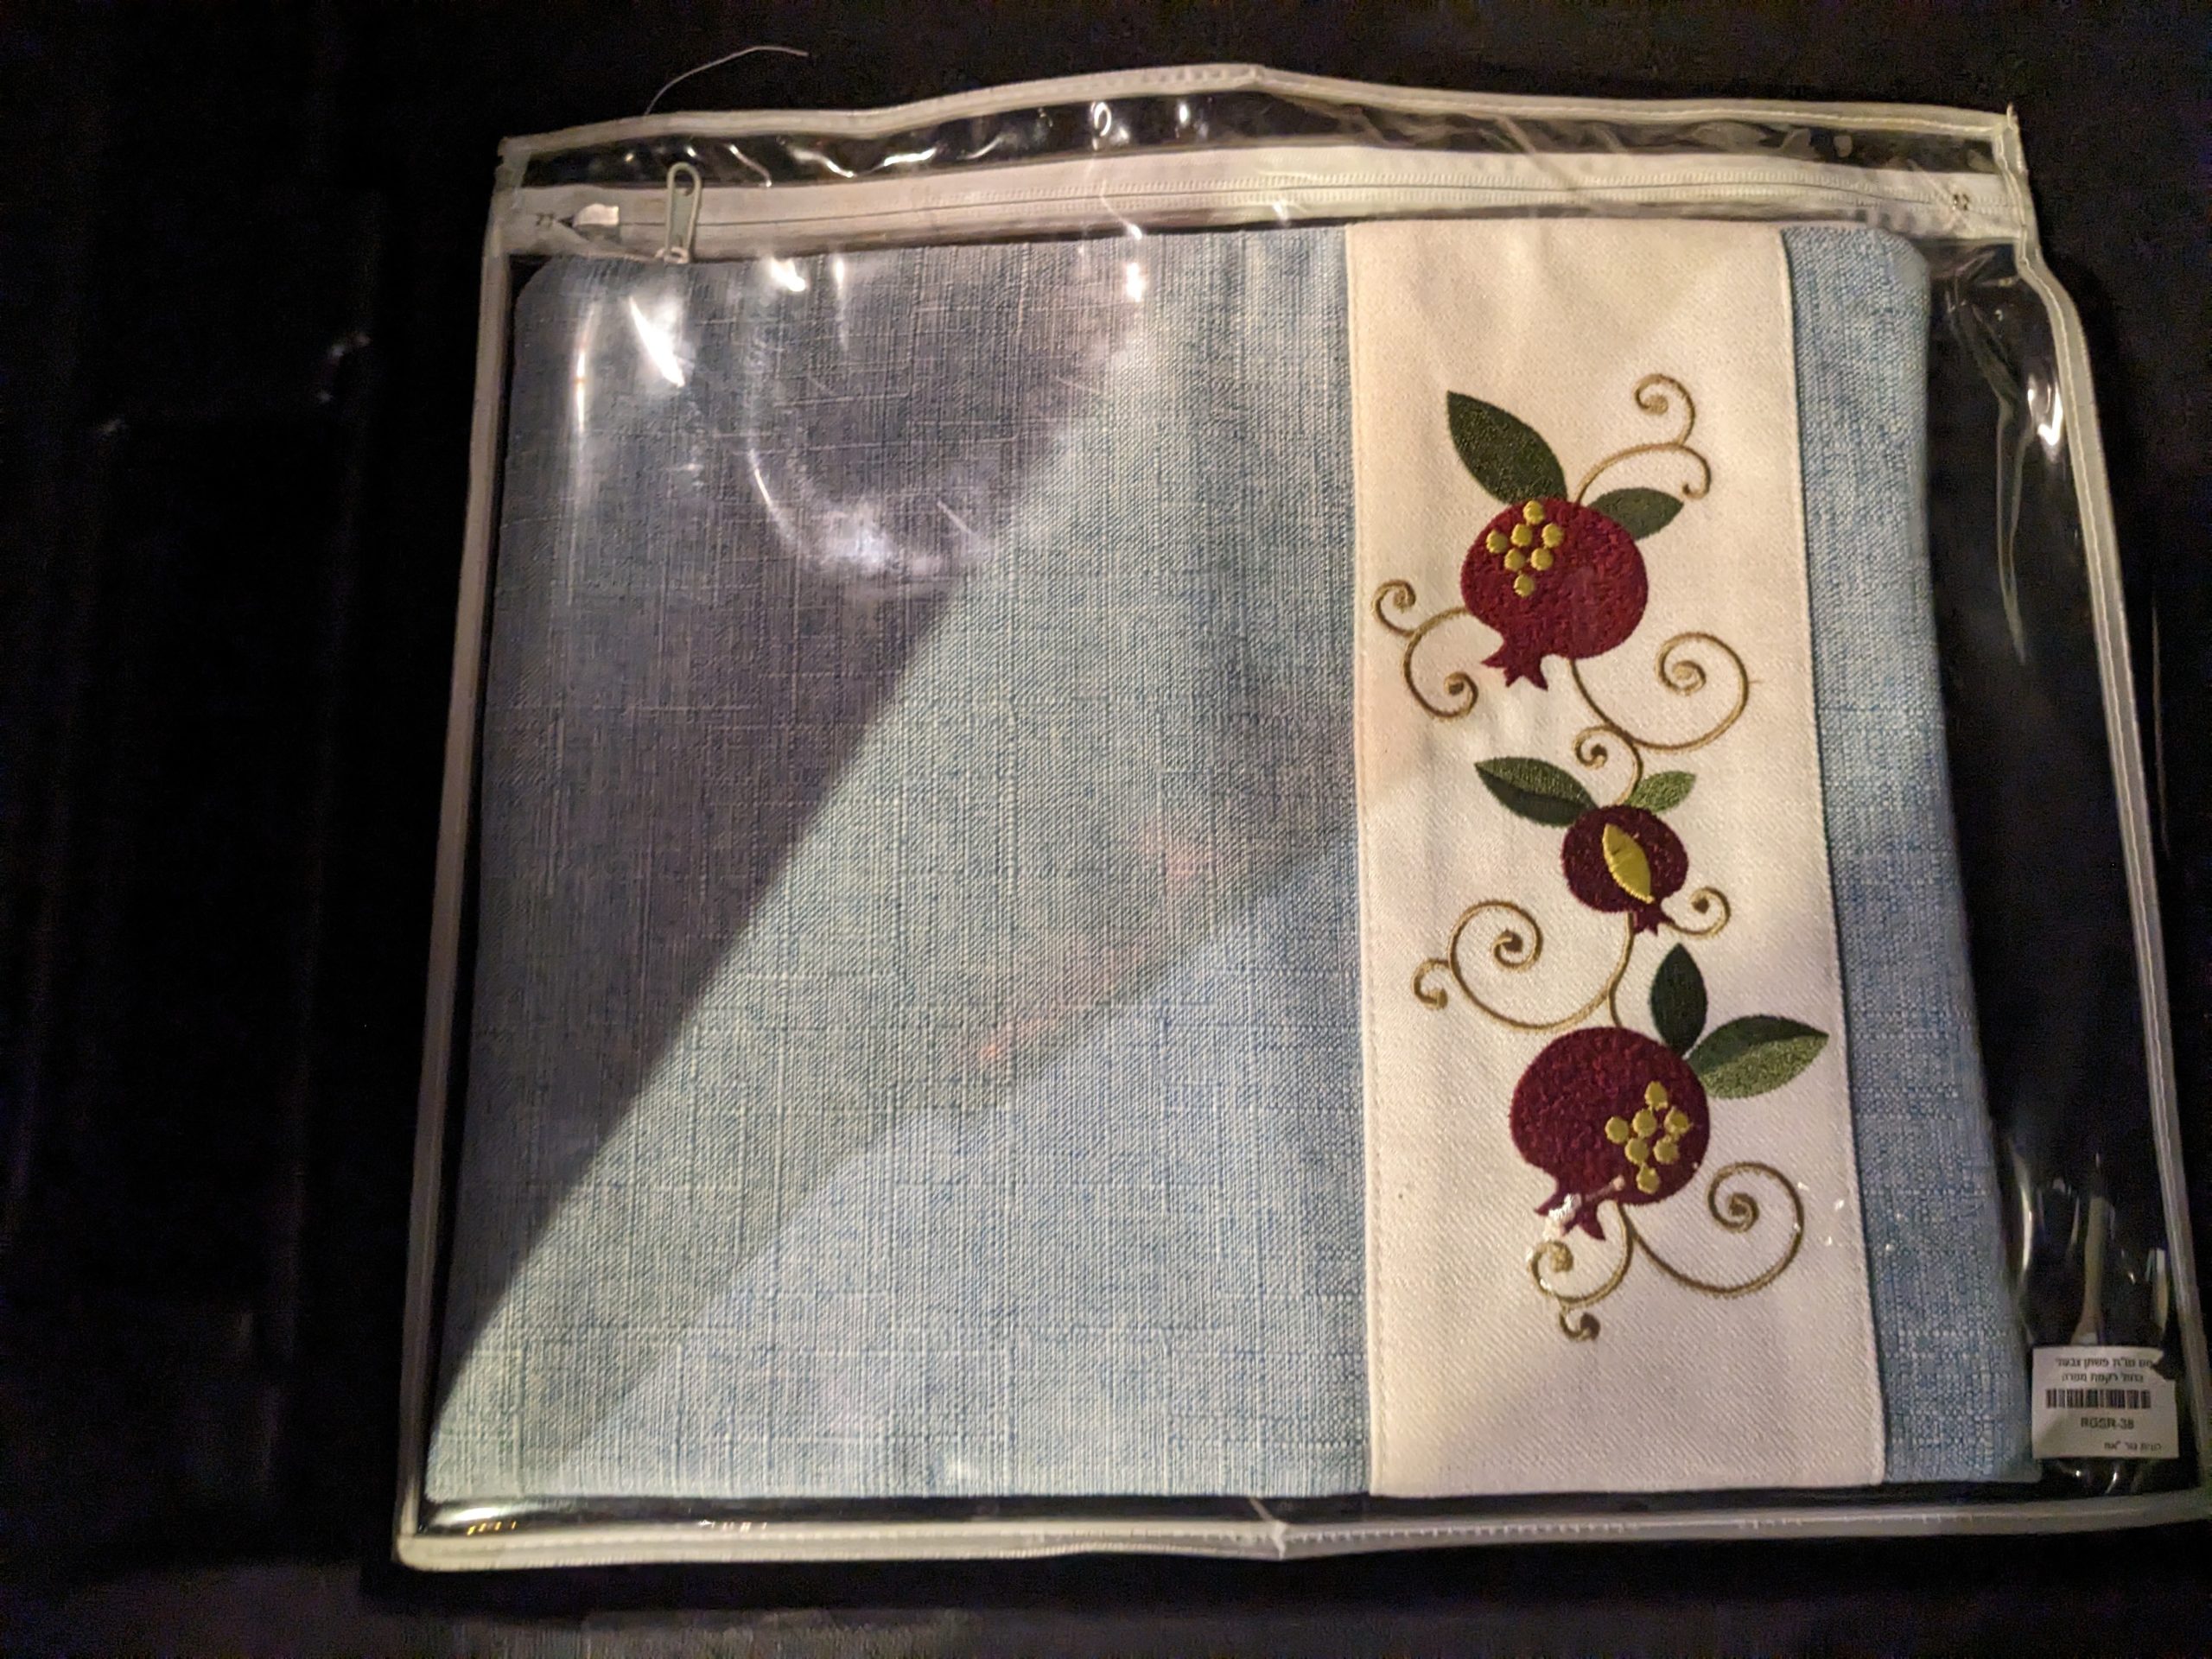 Tallit Bag with Pomegranate by Ronit Gur